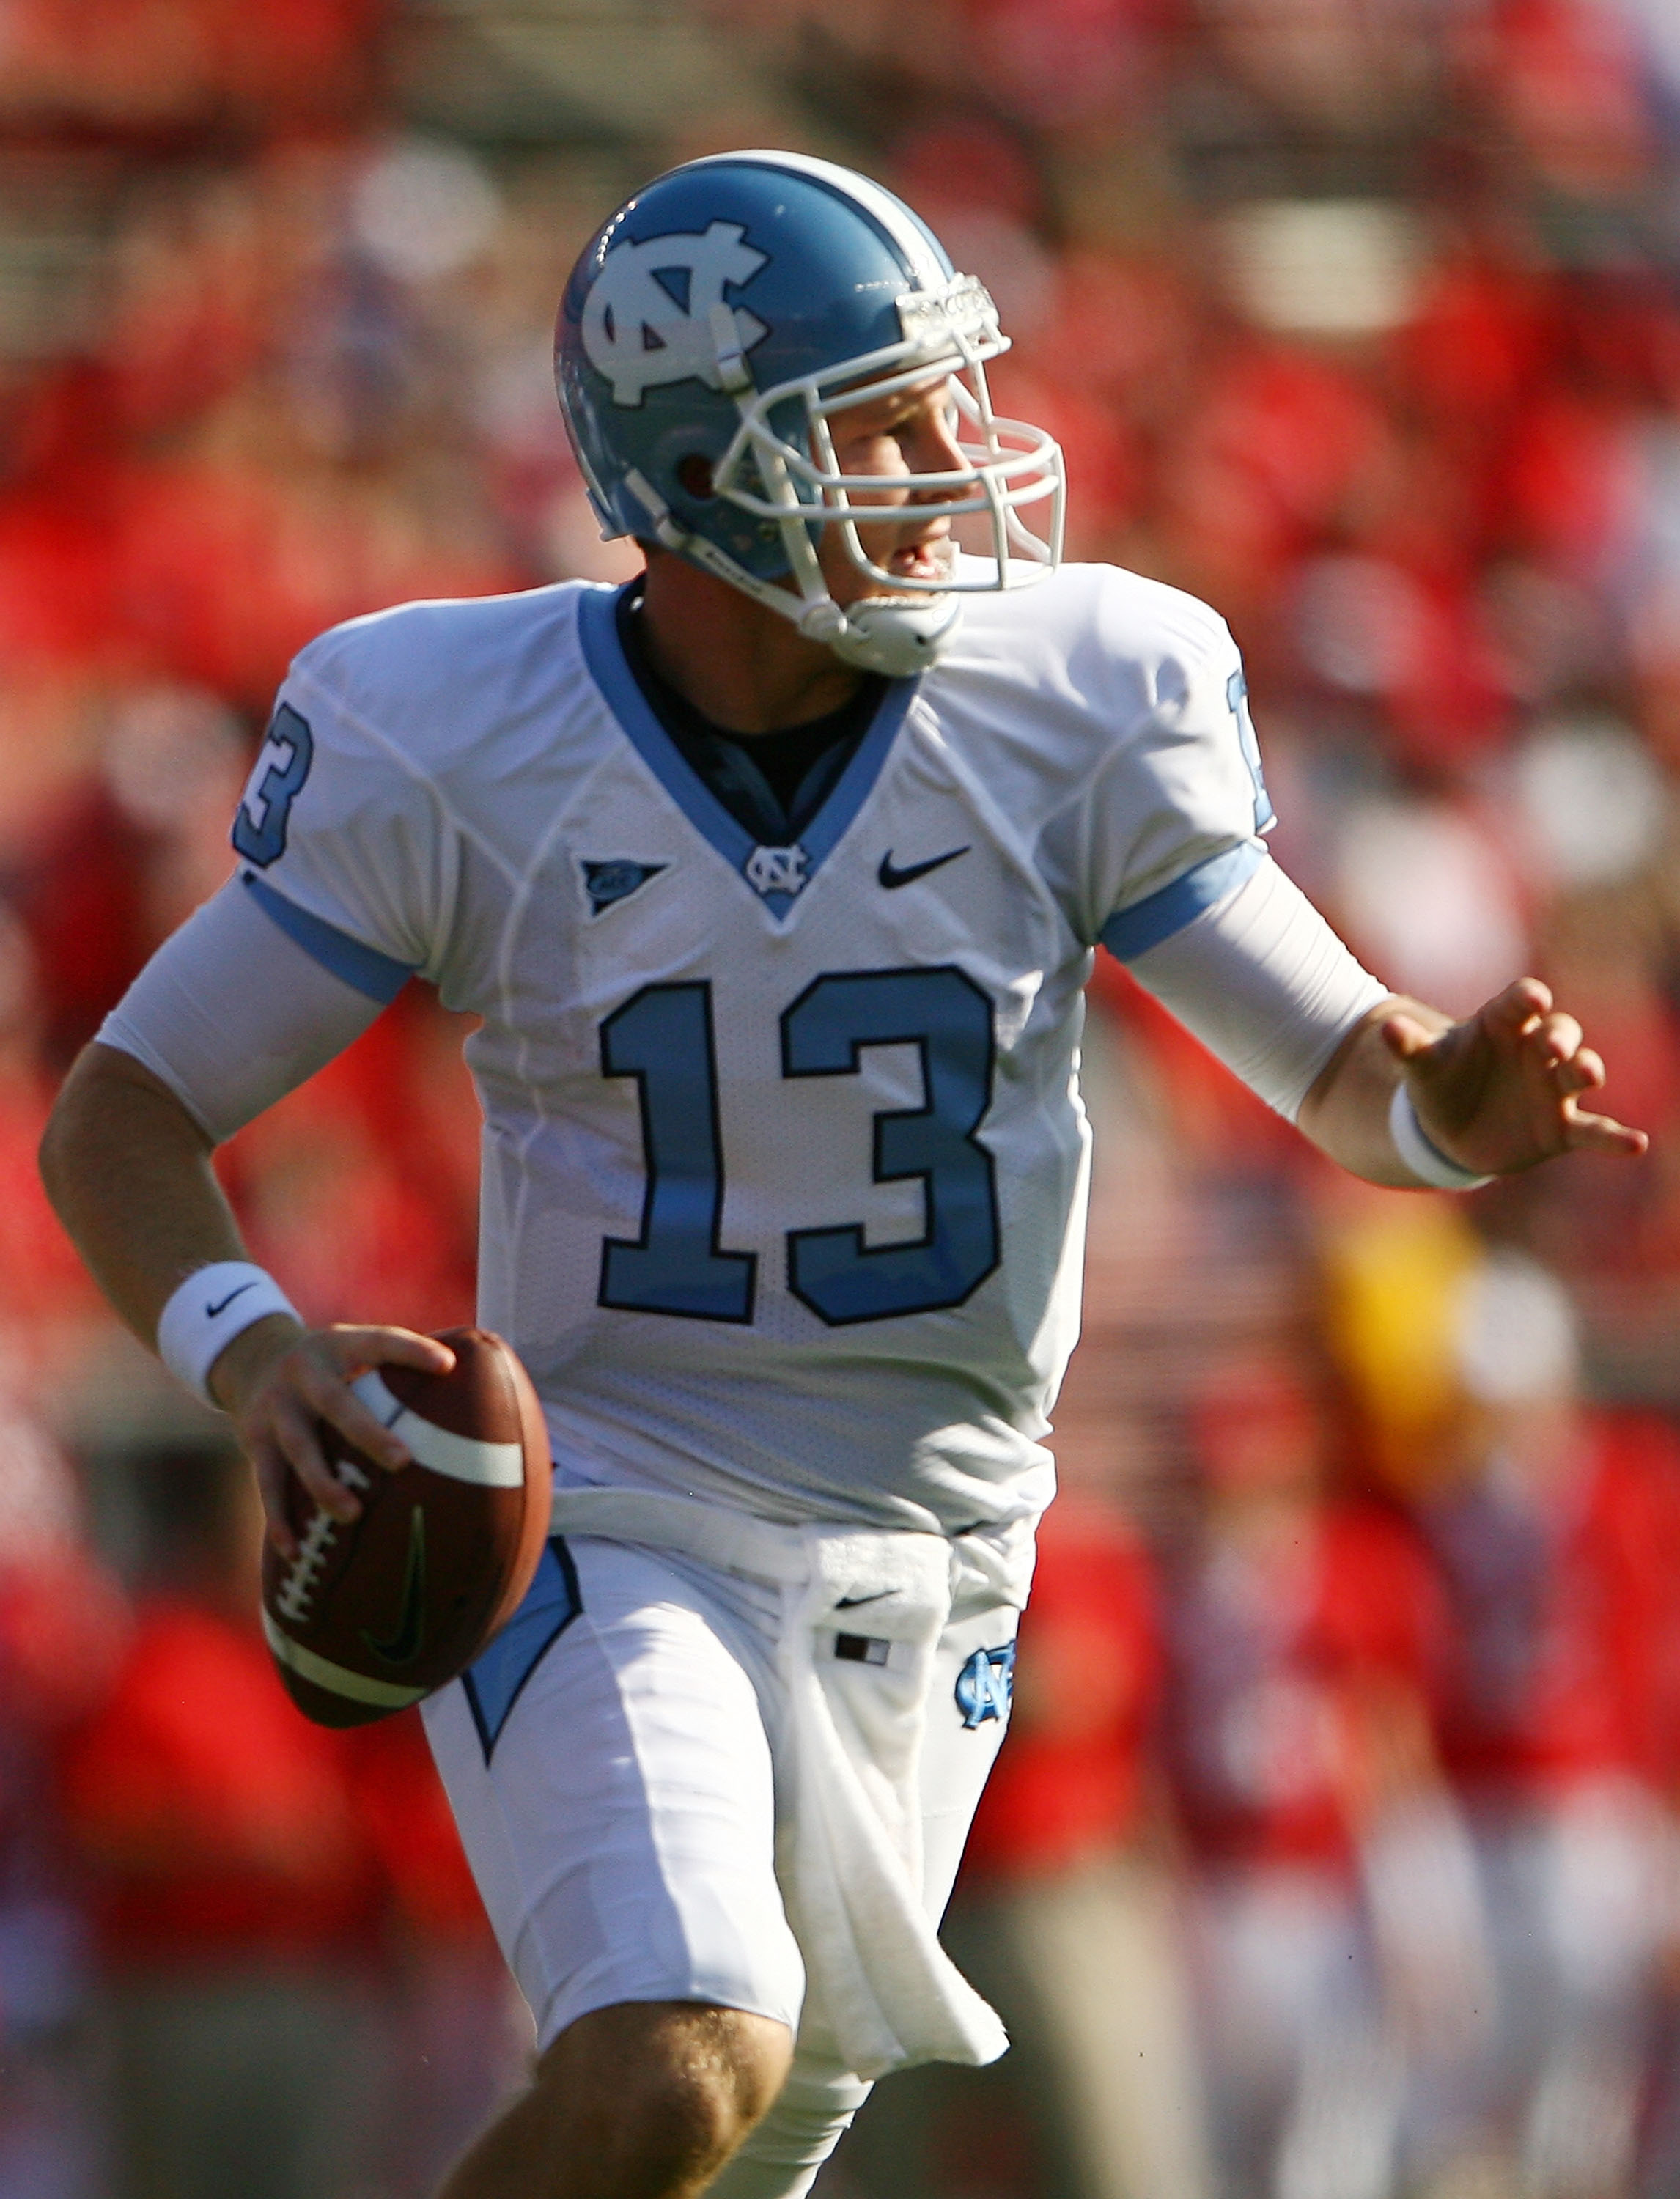 NEW BRUNSWICK, NJ - SEPTEMBER 25:  T.J. Yates #13 of the North Carolina Tar Heels drops back against the Rutgers Scarlet Knights at Rutgers Stadium on September 25, 2010 in New Brunswick, New Jersey.  (Photo by Andrew Burton/Getty Images)